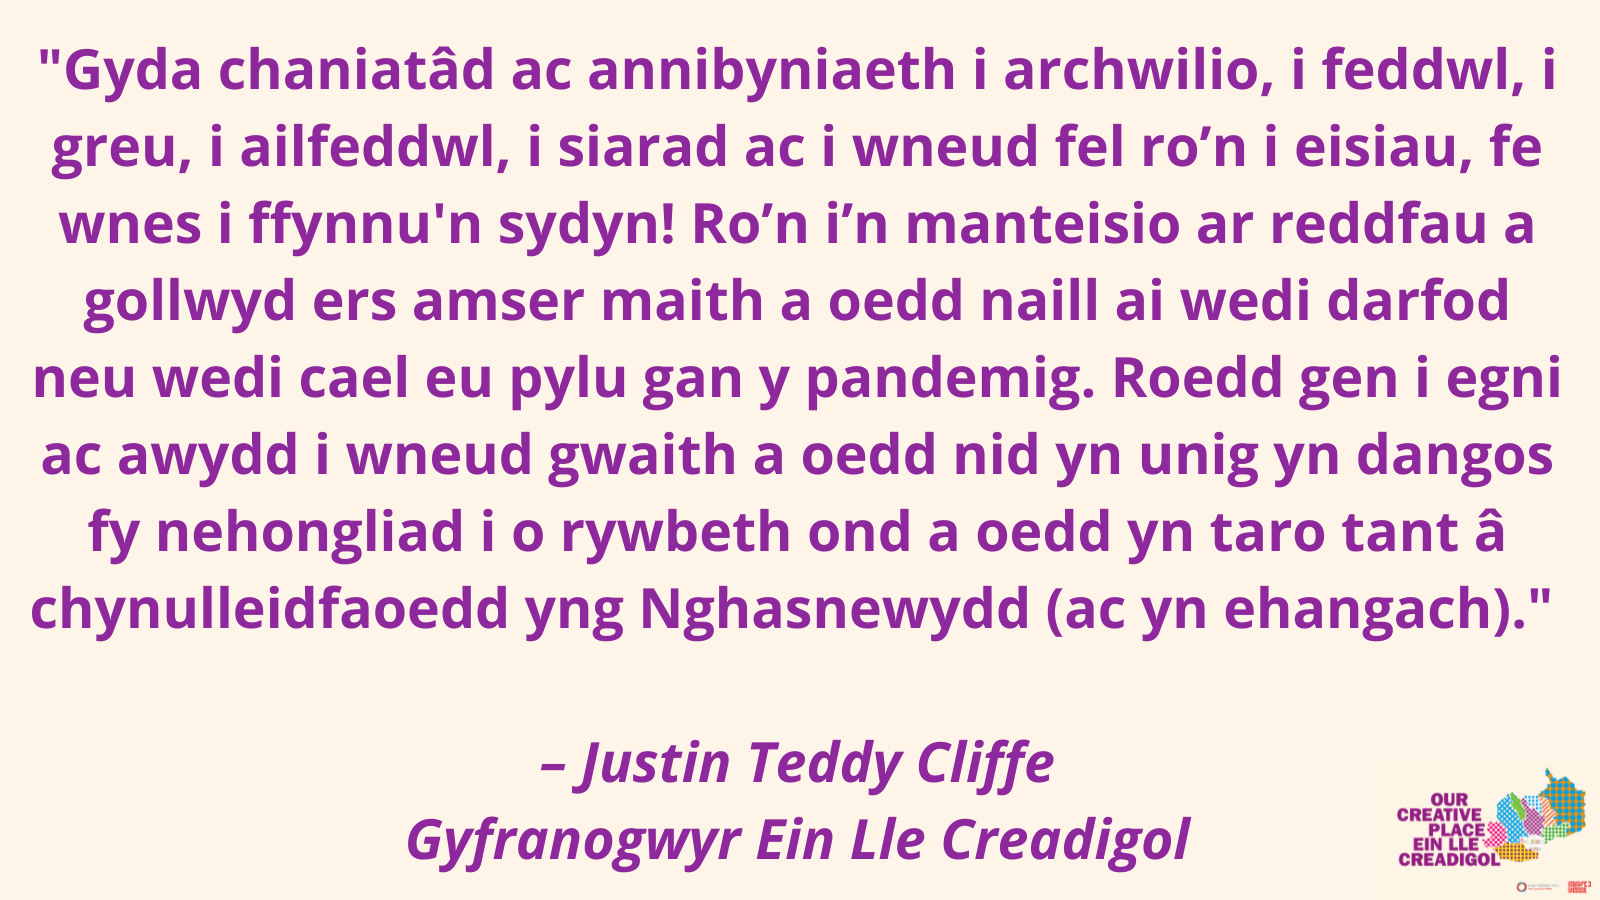 Justin Teddy Cliffe quote about Our Creative Place